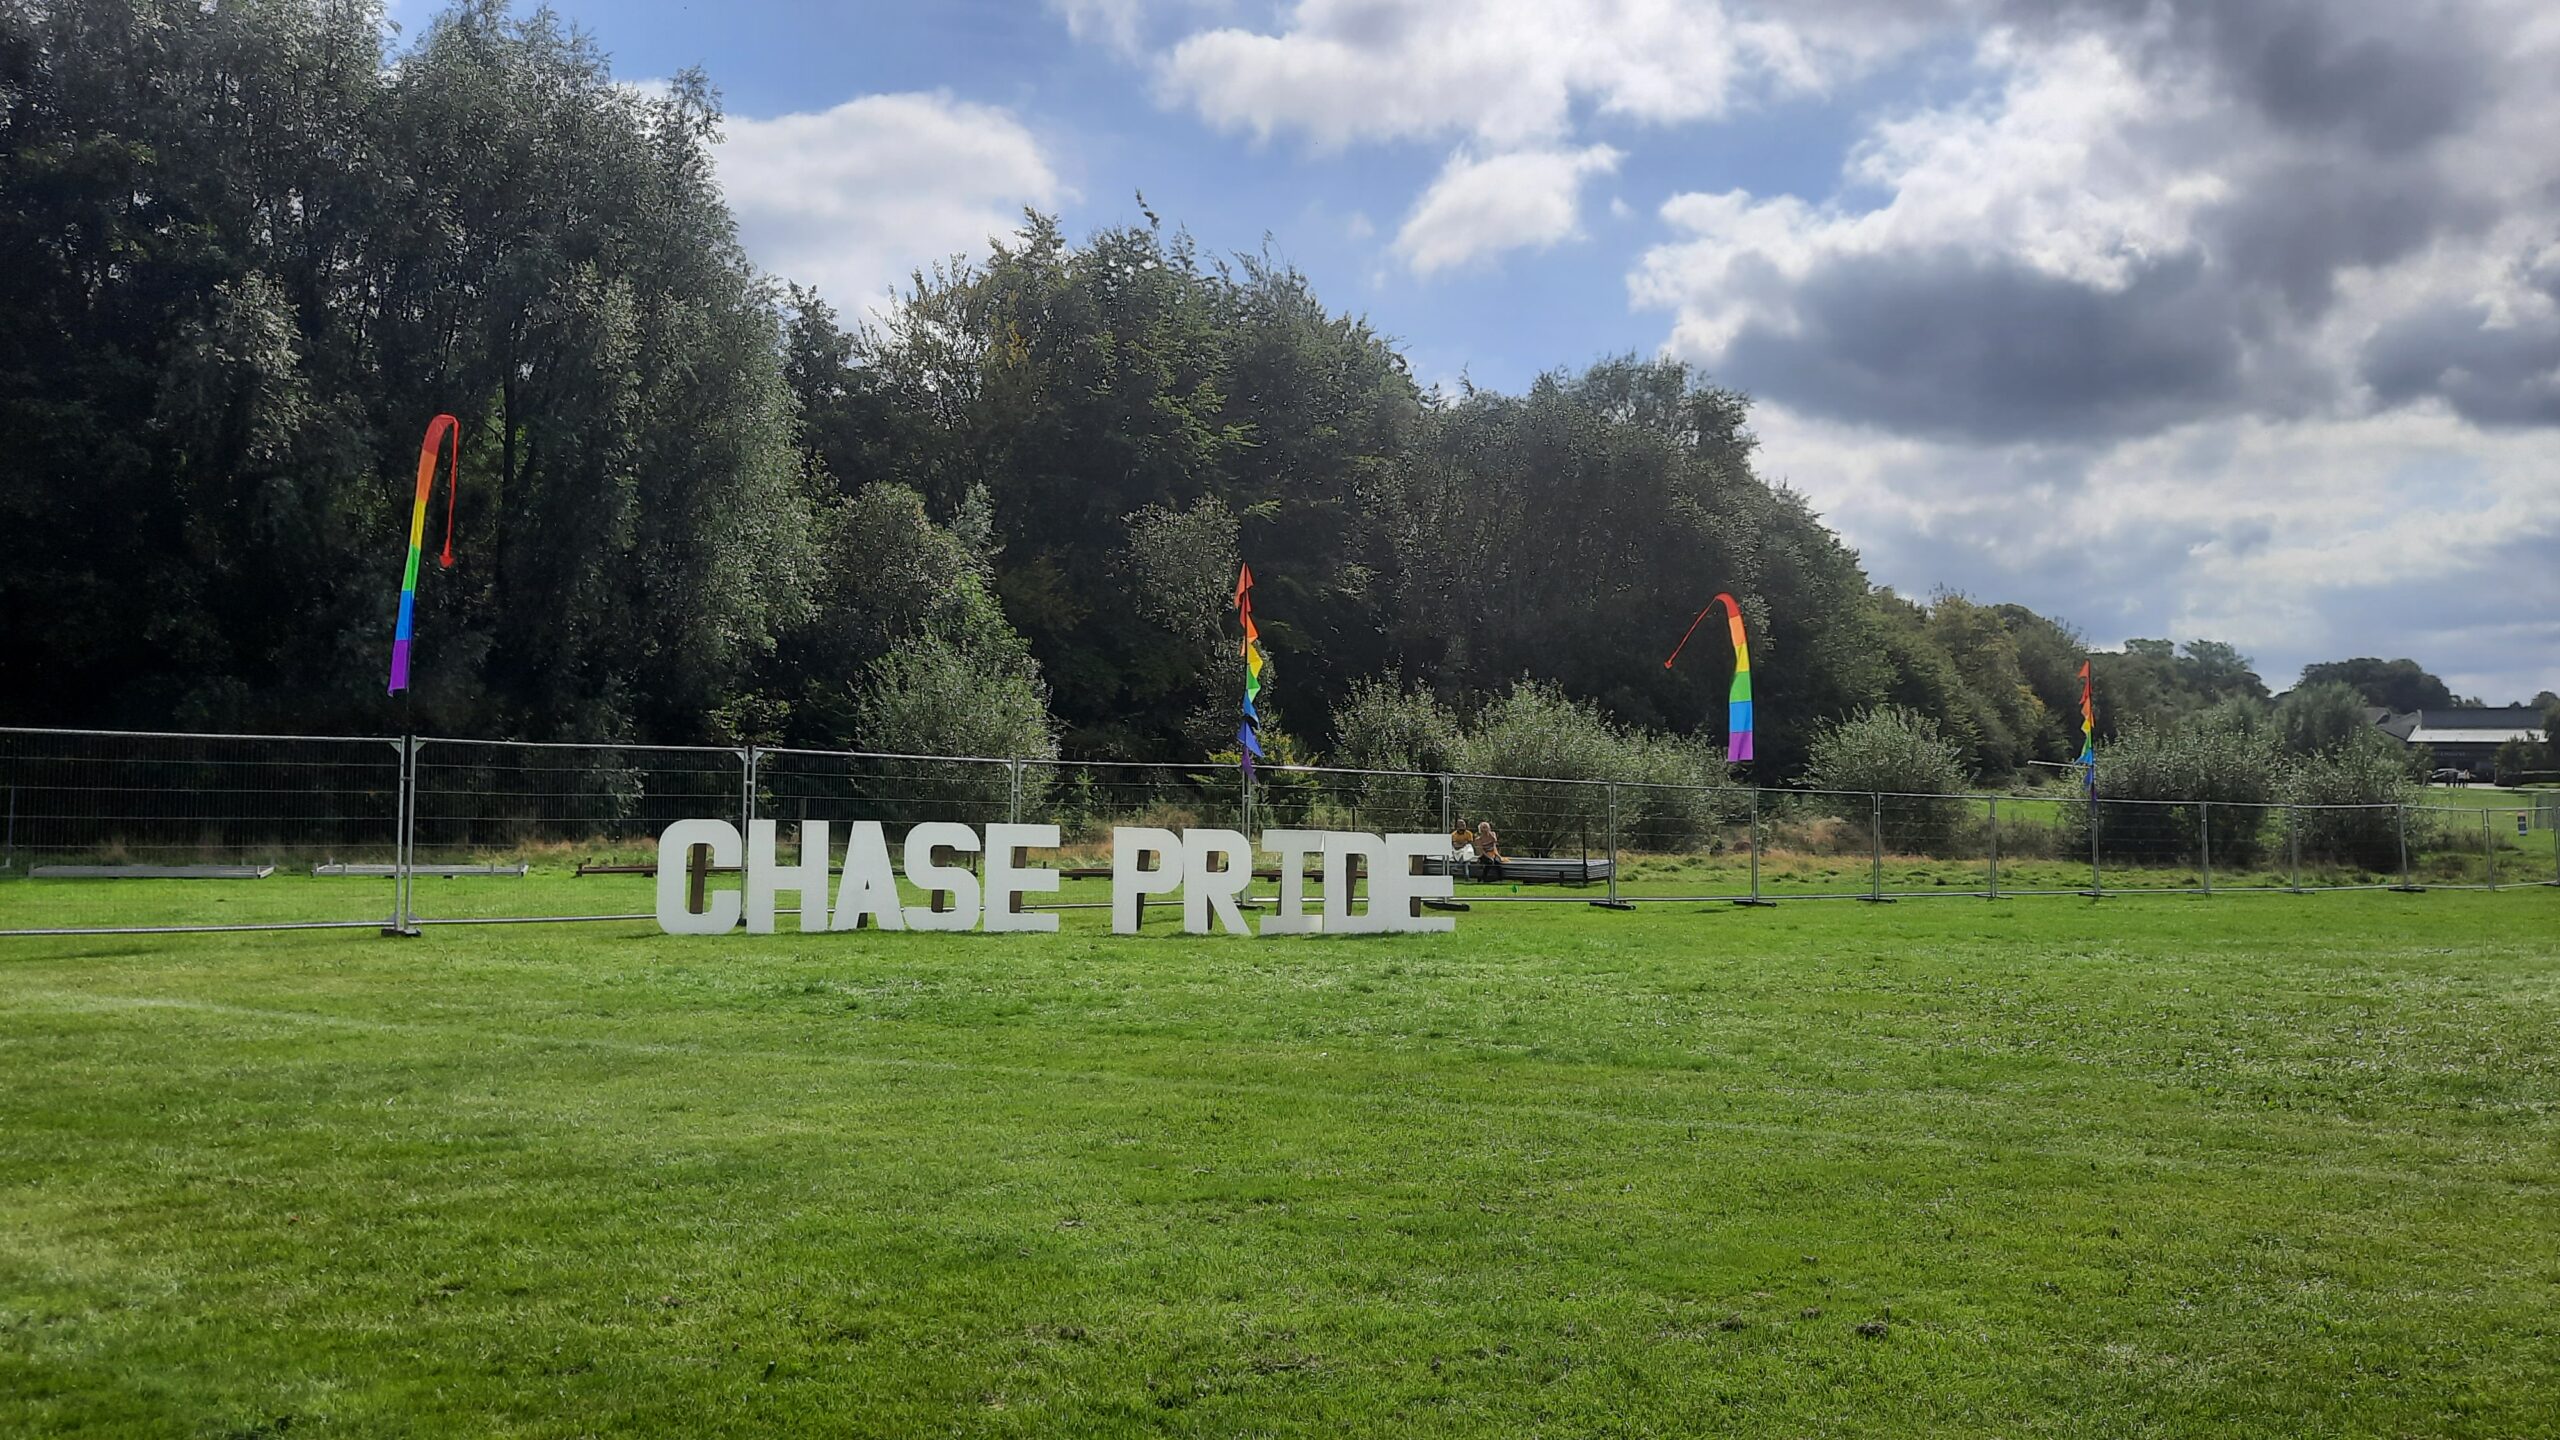 Chase Pride postponed until 2025 due to “financial difficulties”